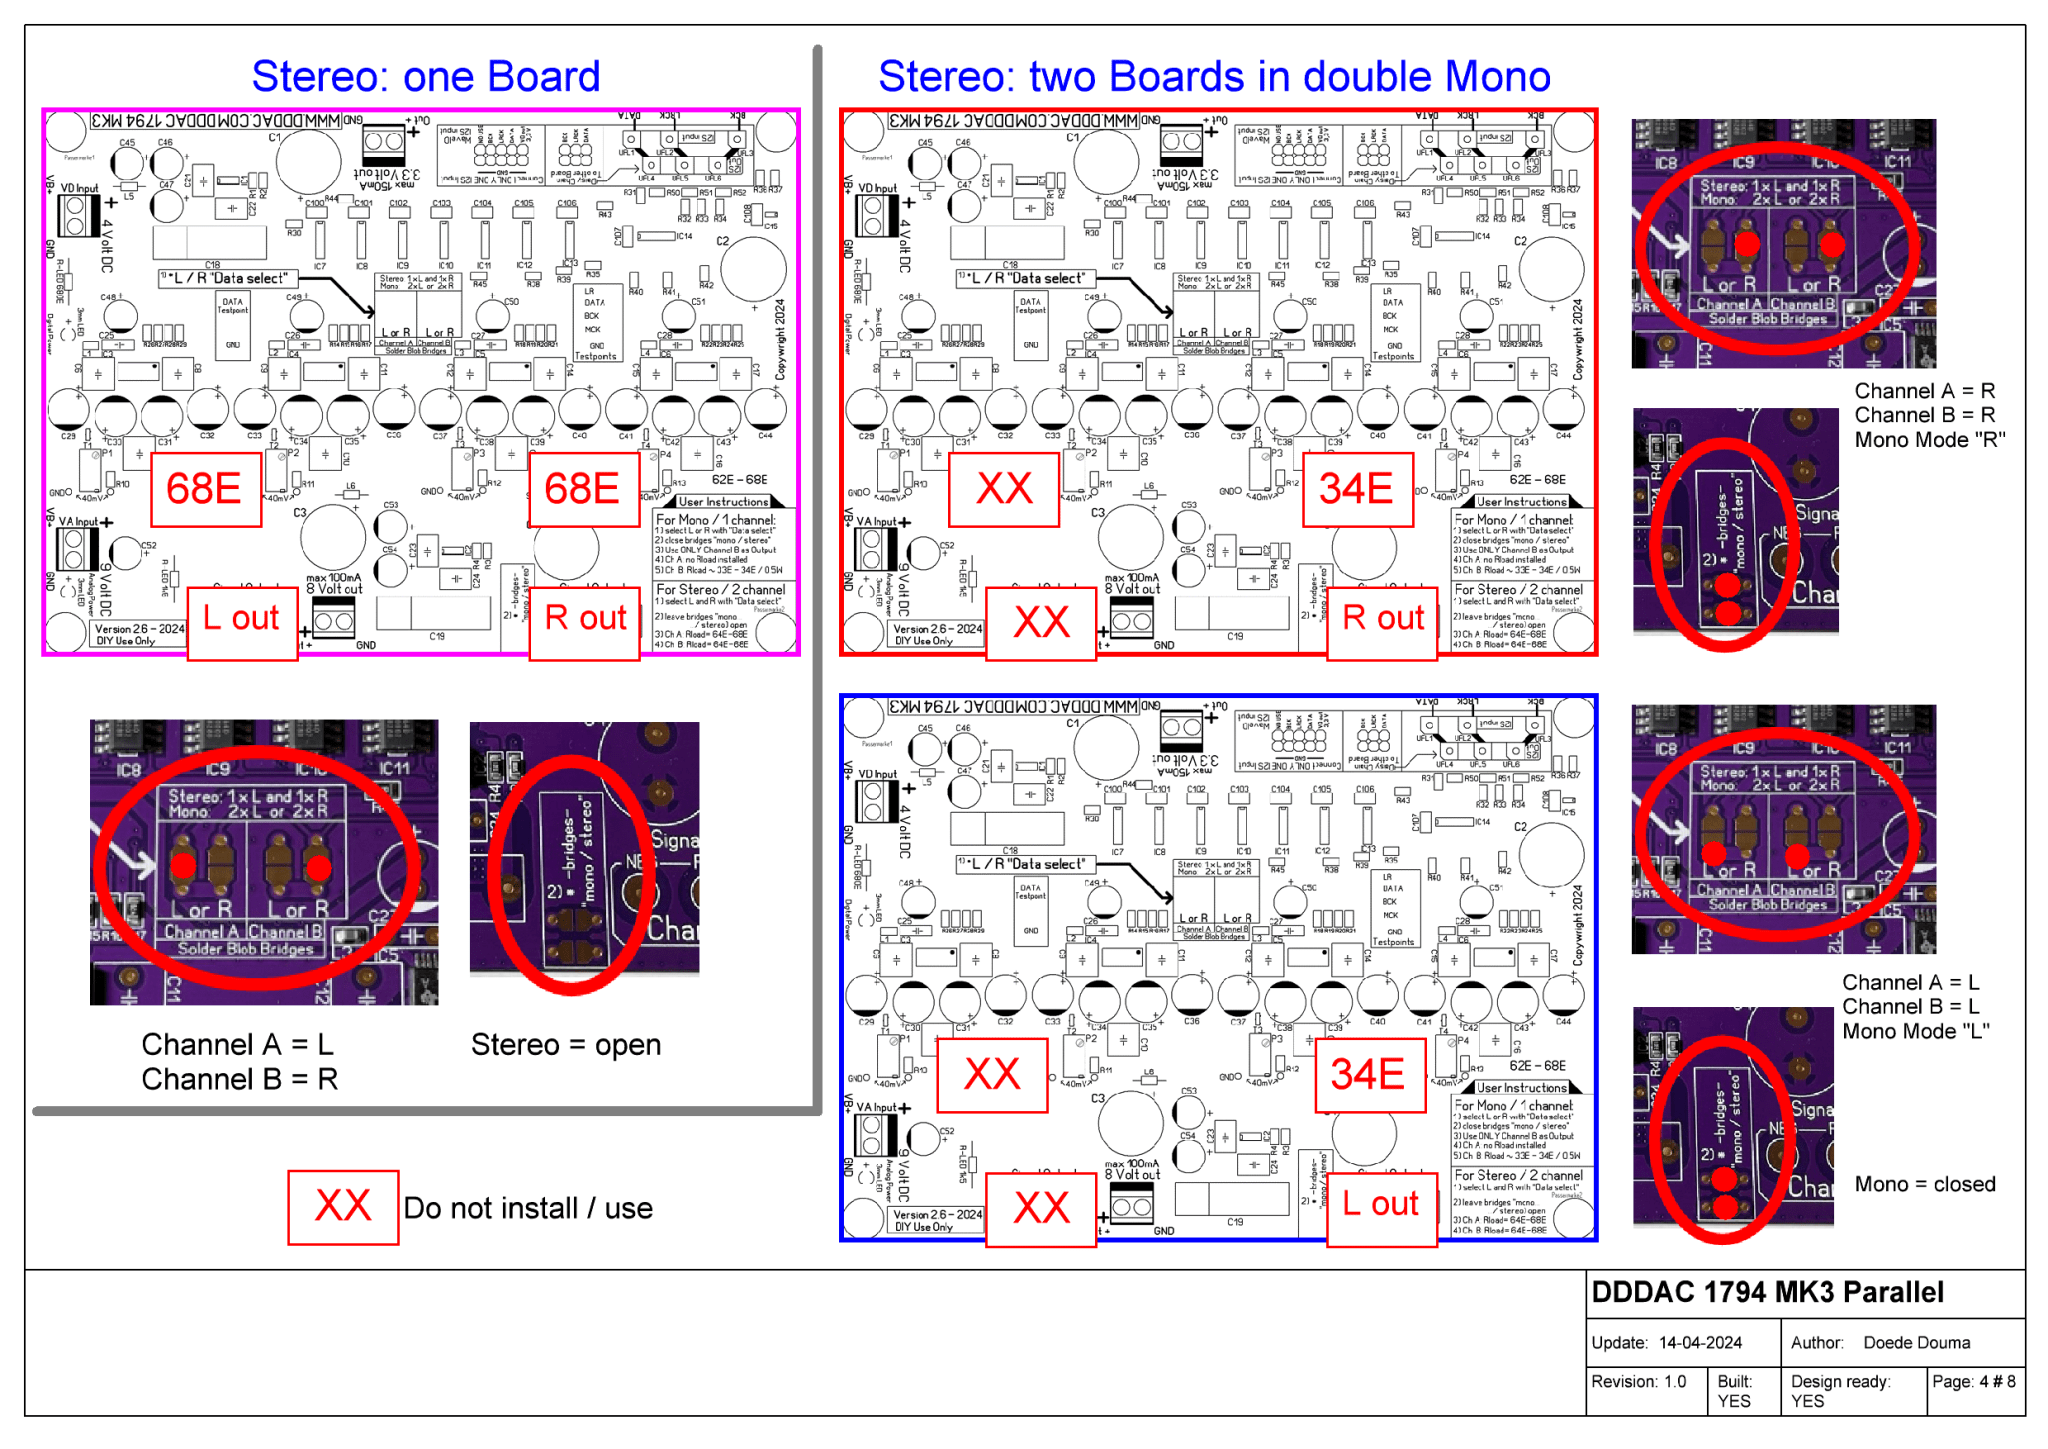 dddac NOS 1794 MK3  - boards stereo options.png